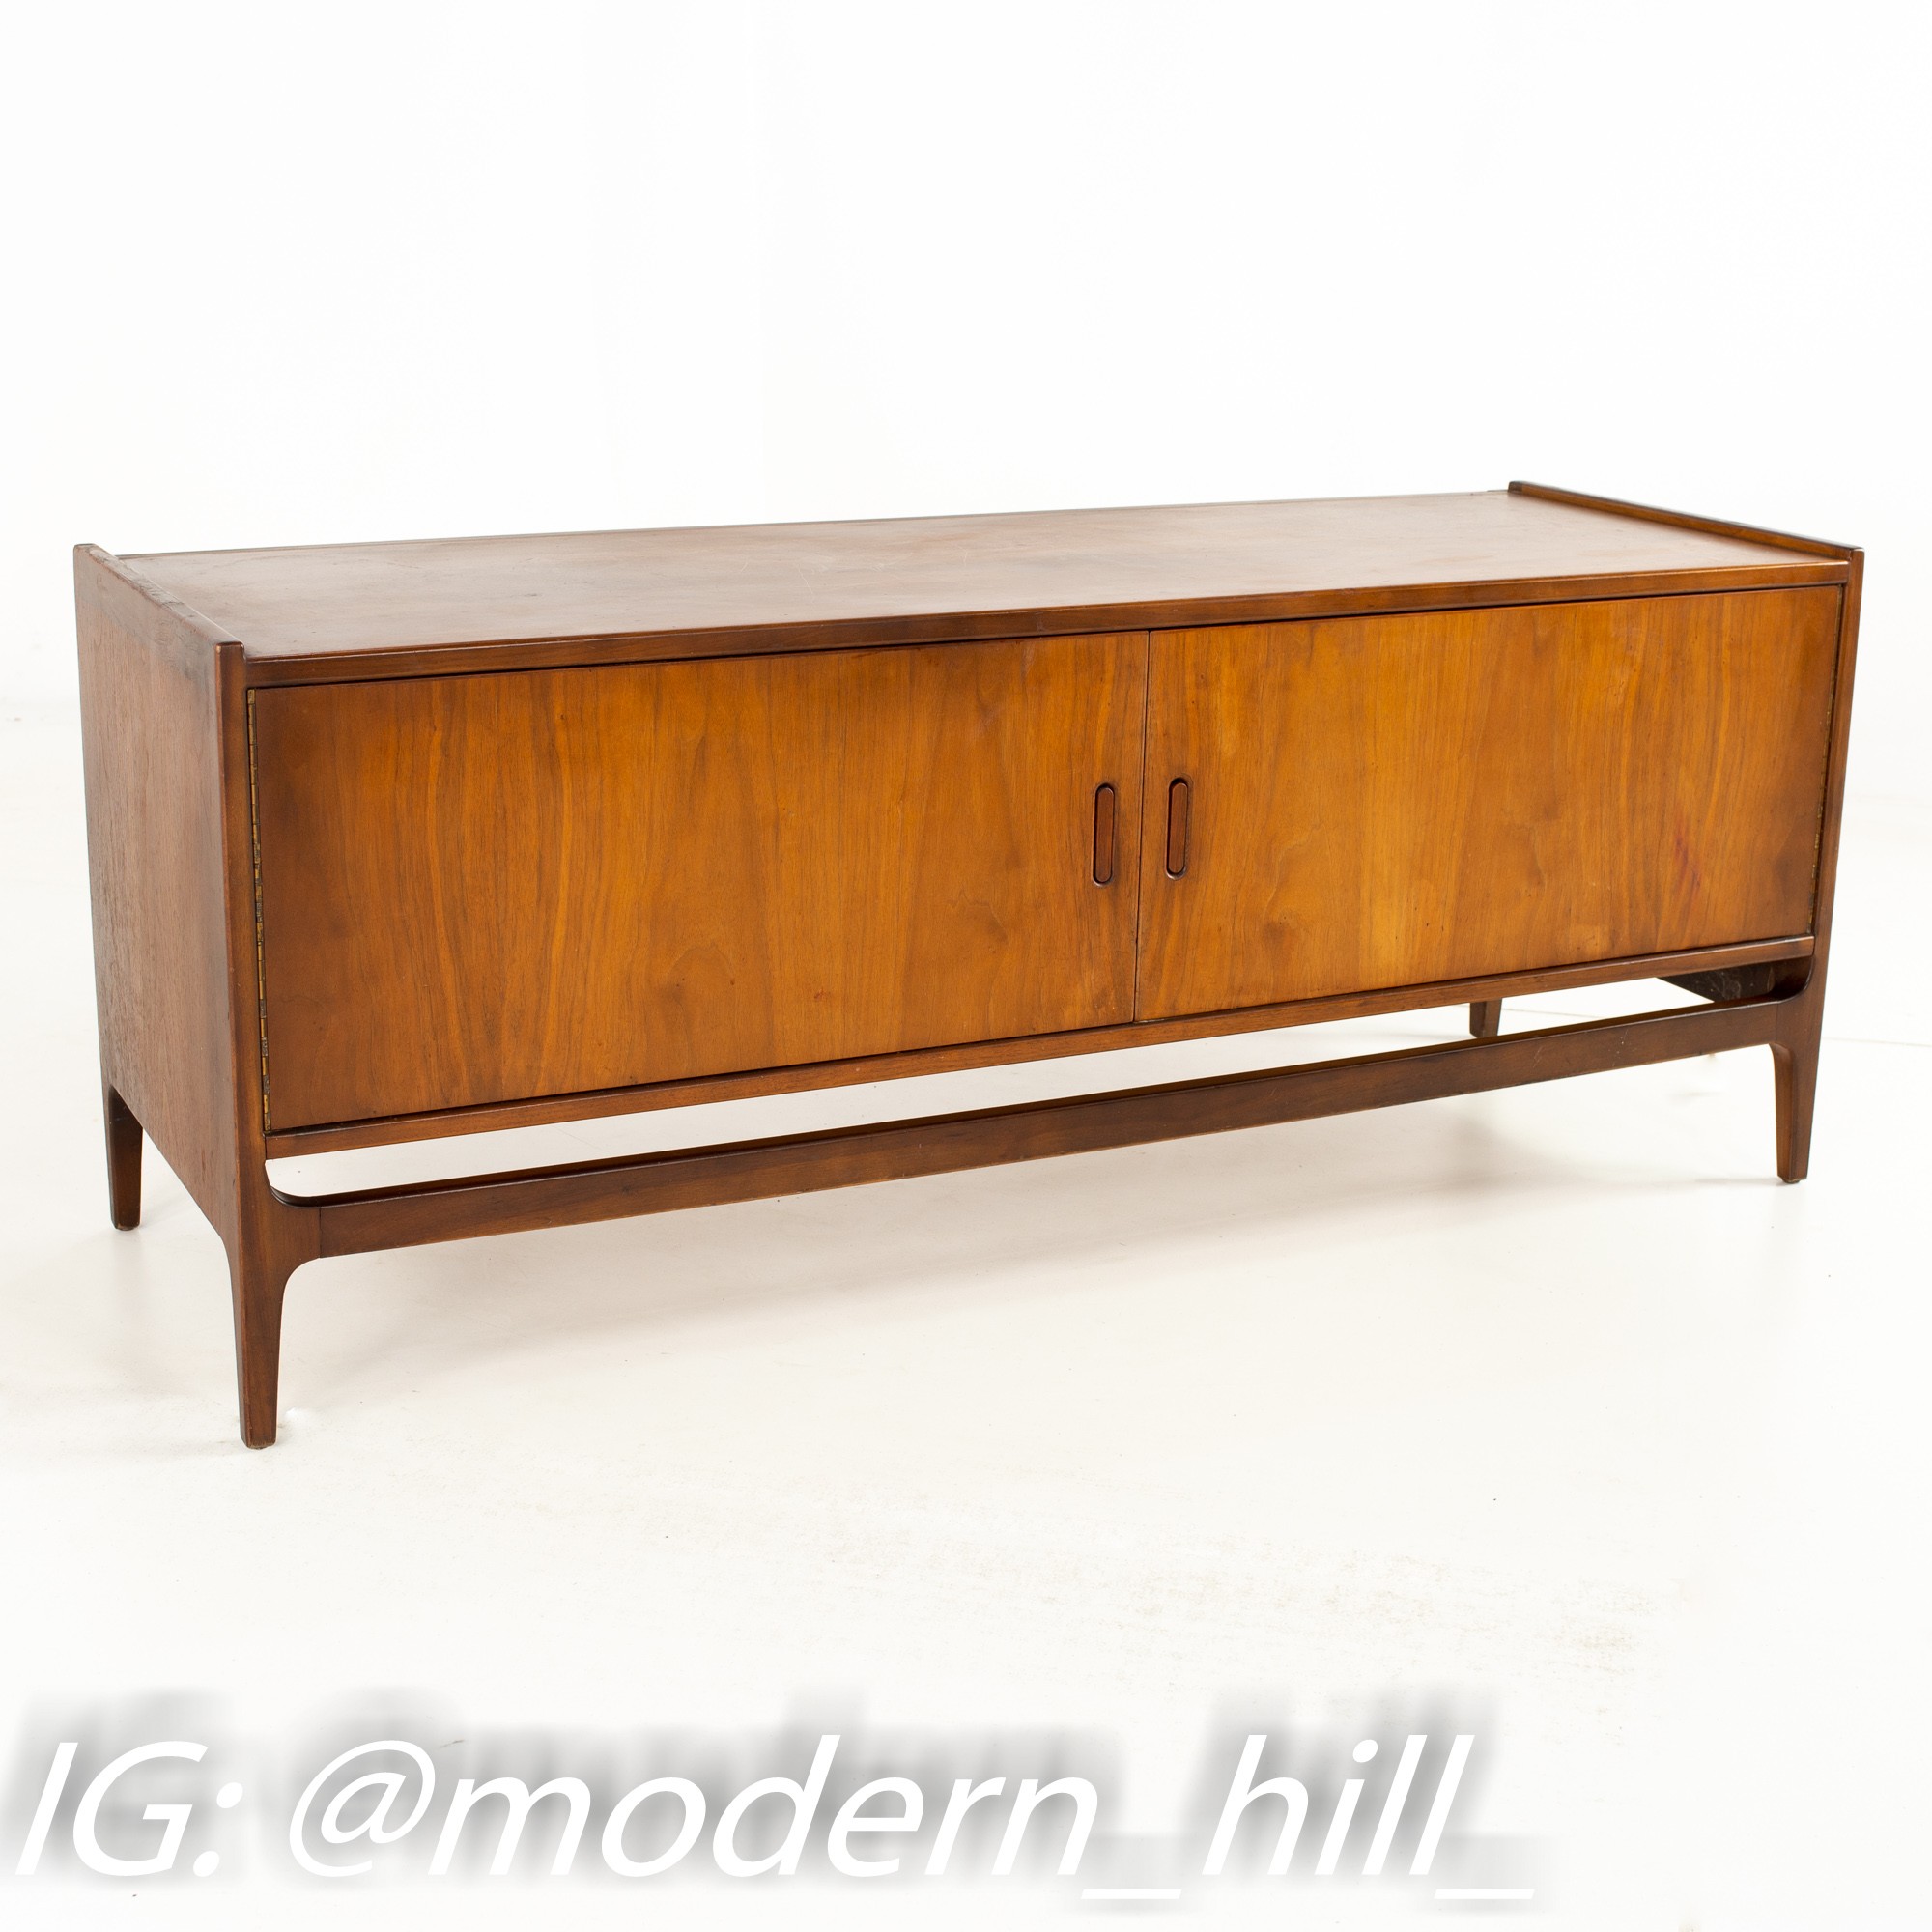 Richard Thompson for Glenn of California Mid Century Sideboard Credenza Buffet and Hutch Display Cabinet